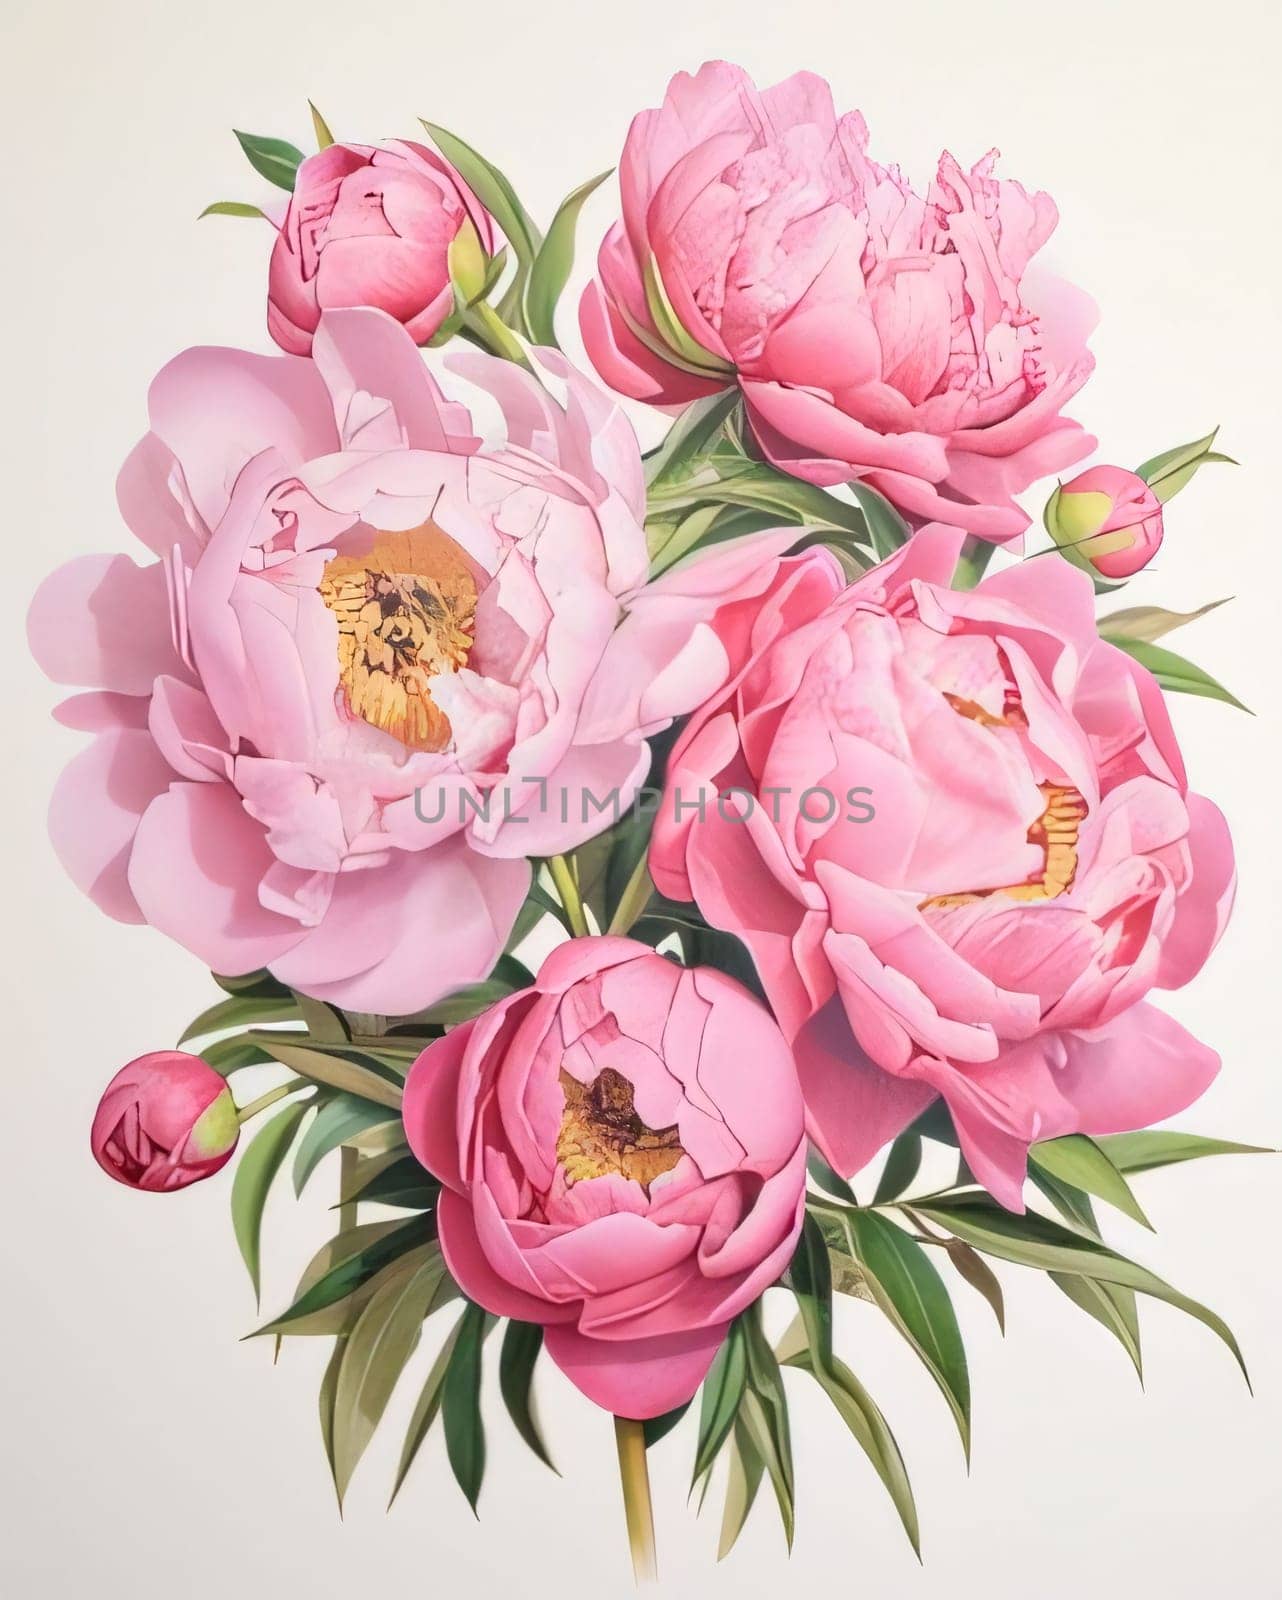 Bouquet of pink flowers with green leaves stems. Light background.Flowering flowers, a symbol of spring, new life.A joyful time of nature awakening to life.